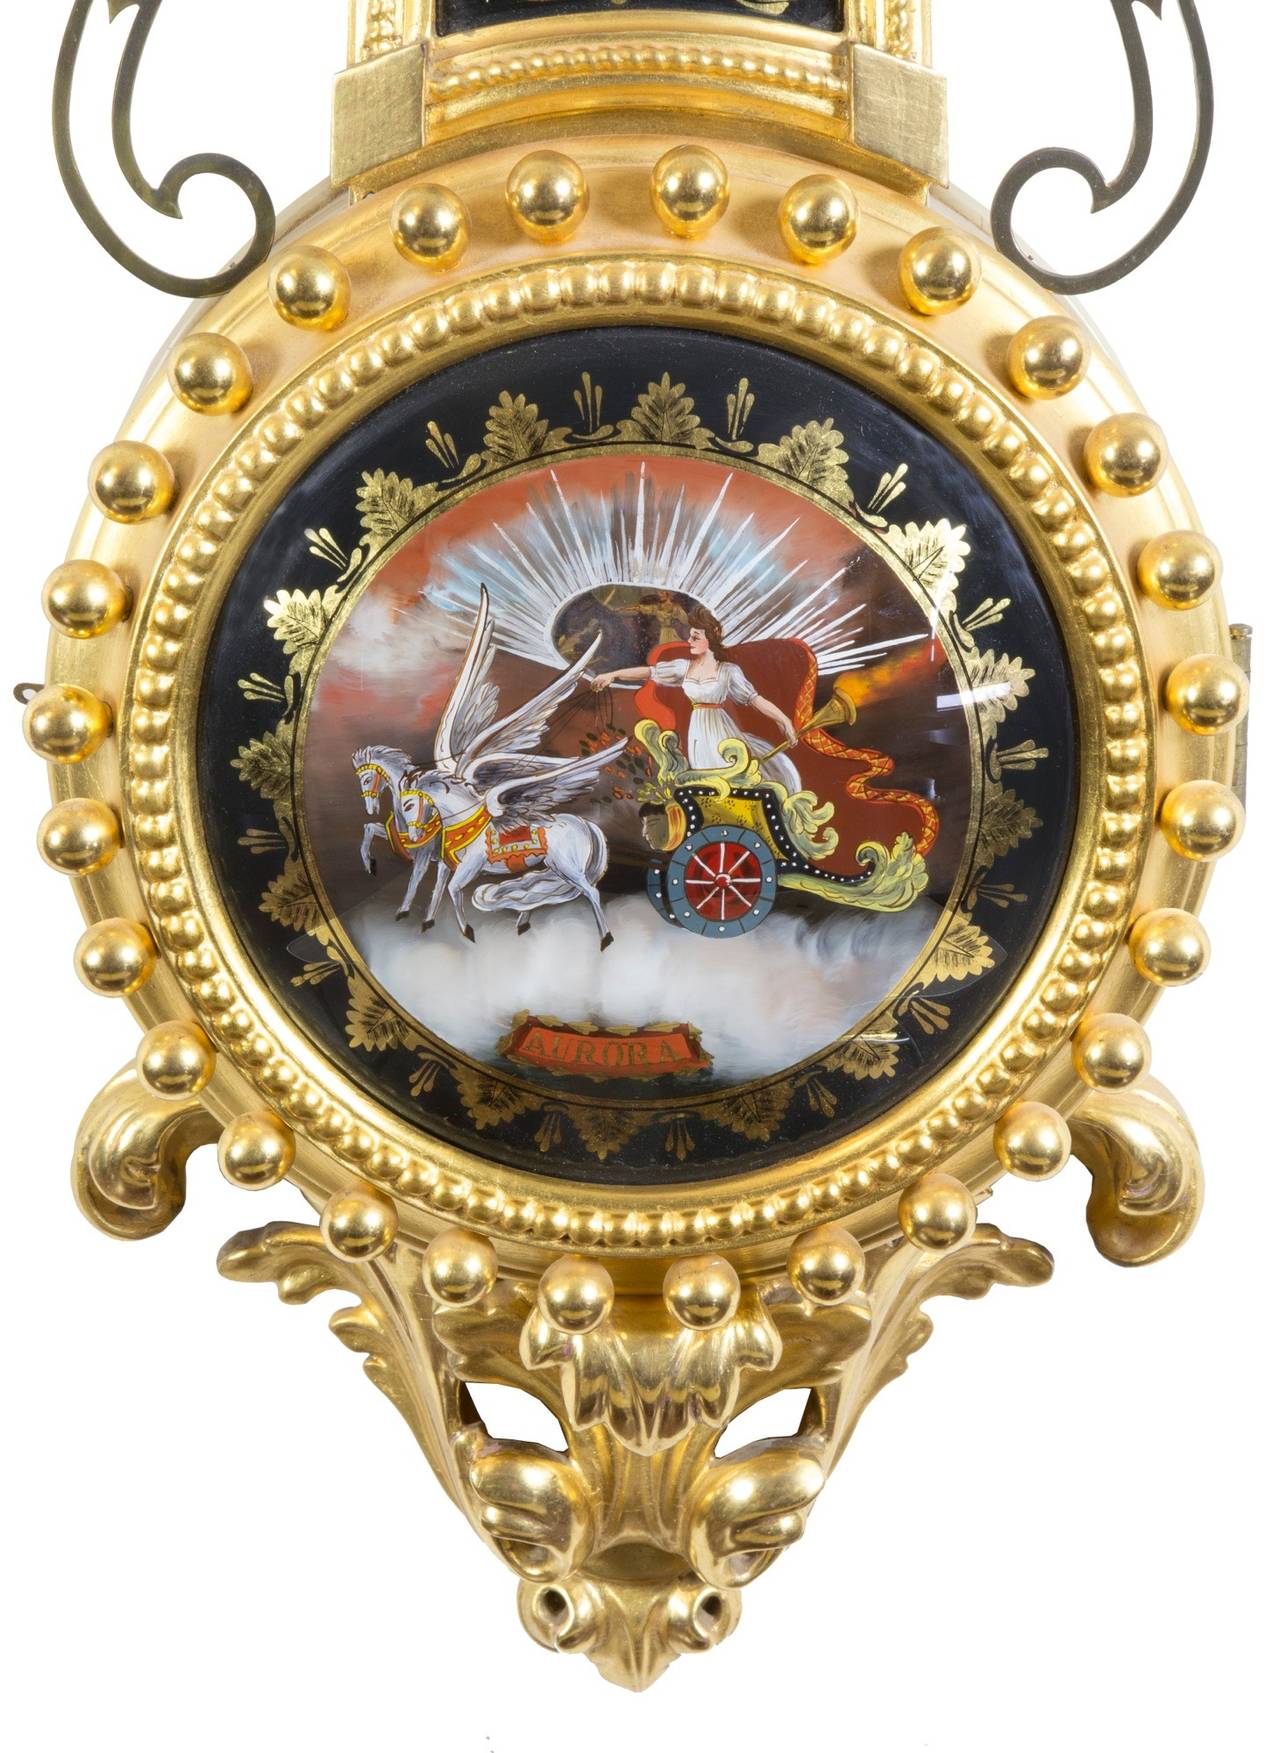 Elmer Stennes is no more, but his clocks are a legend, some of which were constructed in prison while serving a murder sentence. The gilding on this clock is highly burnished and of the very best, as is the carving. The reverse painting and the case